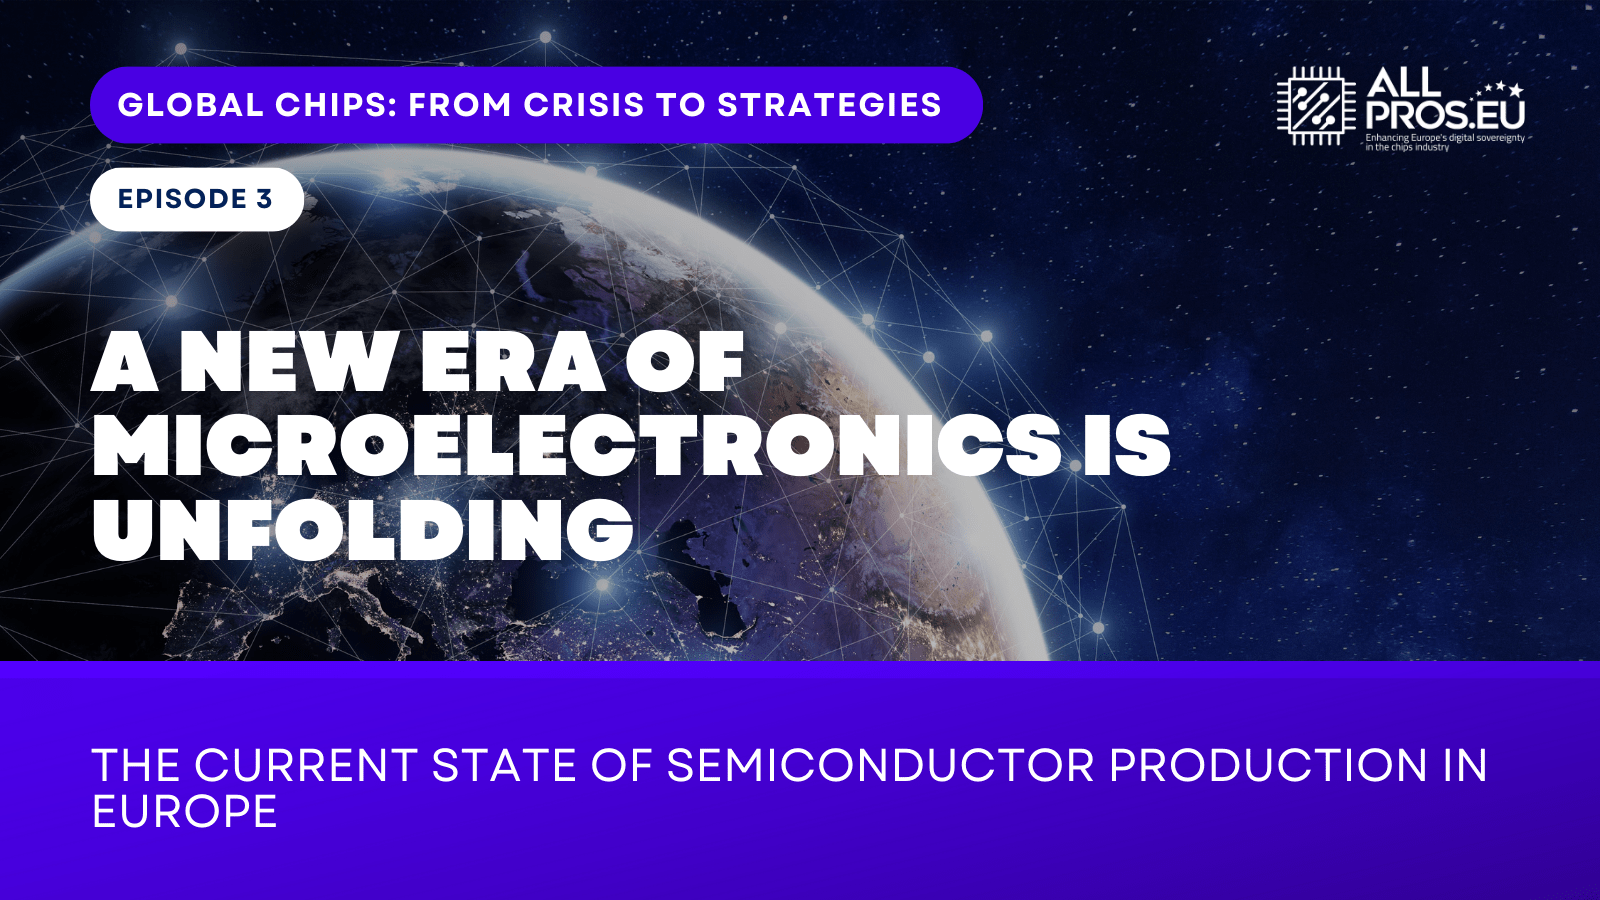 A NEW ERA OF MICROELECTRONICS IS UNFOLDING: THE CURRENT STATE OF SEMICONDUCTOR PRODUCTION IN EUROPE